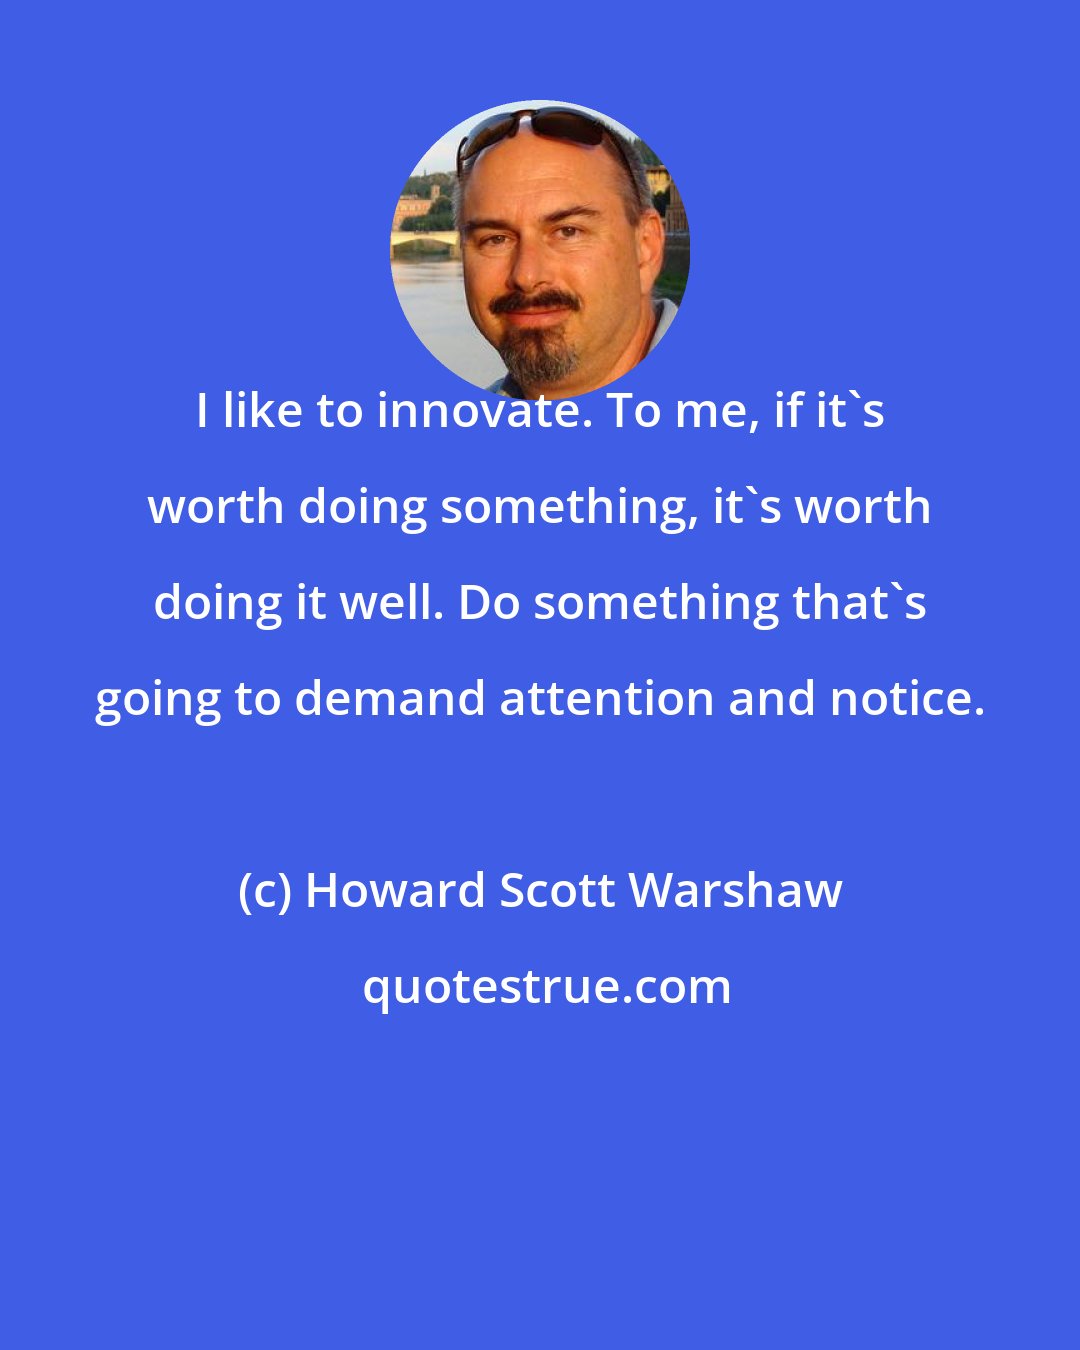 Howard Scott Warshaw: I like to innovate. To me, if it's worth doing something, it's worth doing it well. Do something that's going to demand attention and notice.